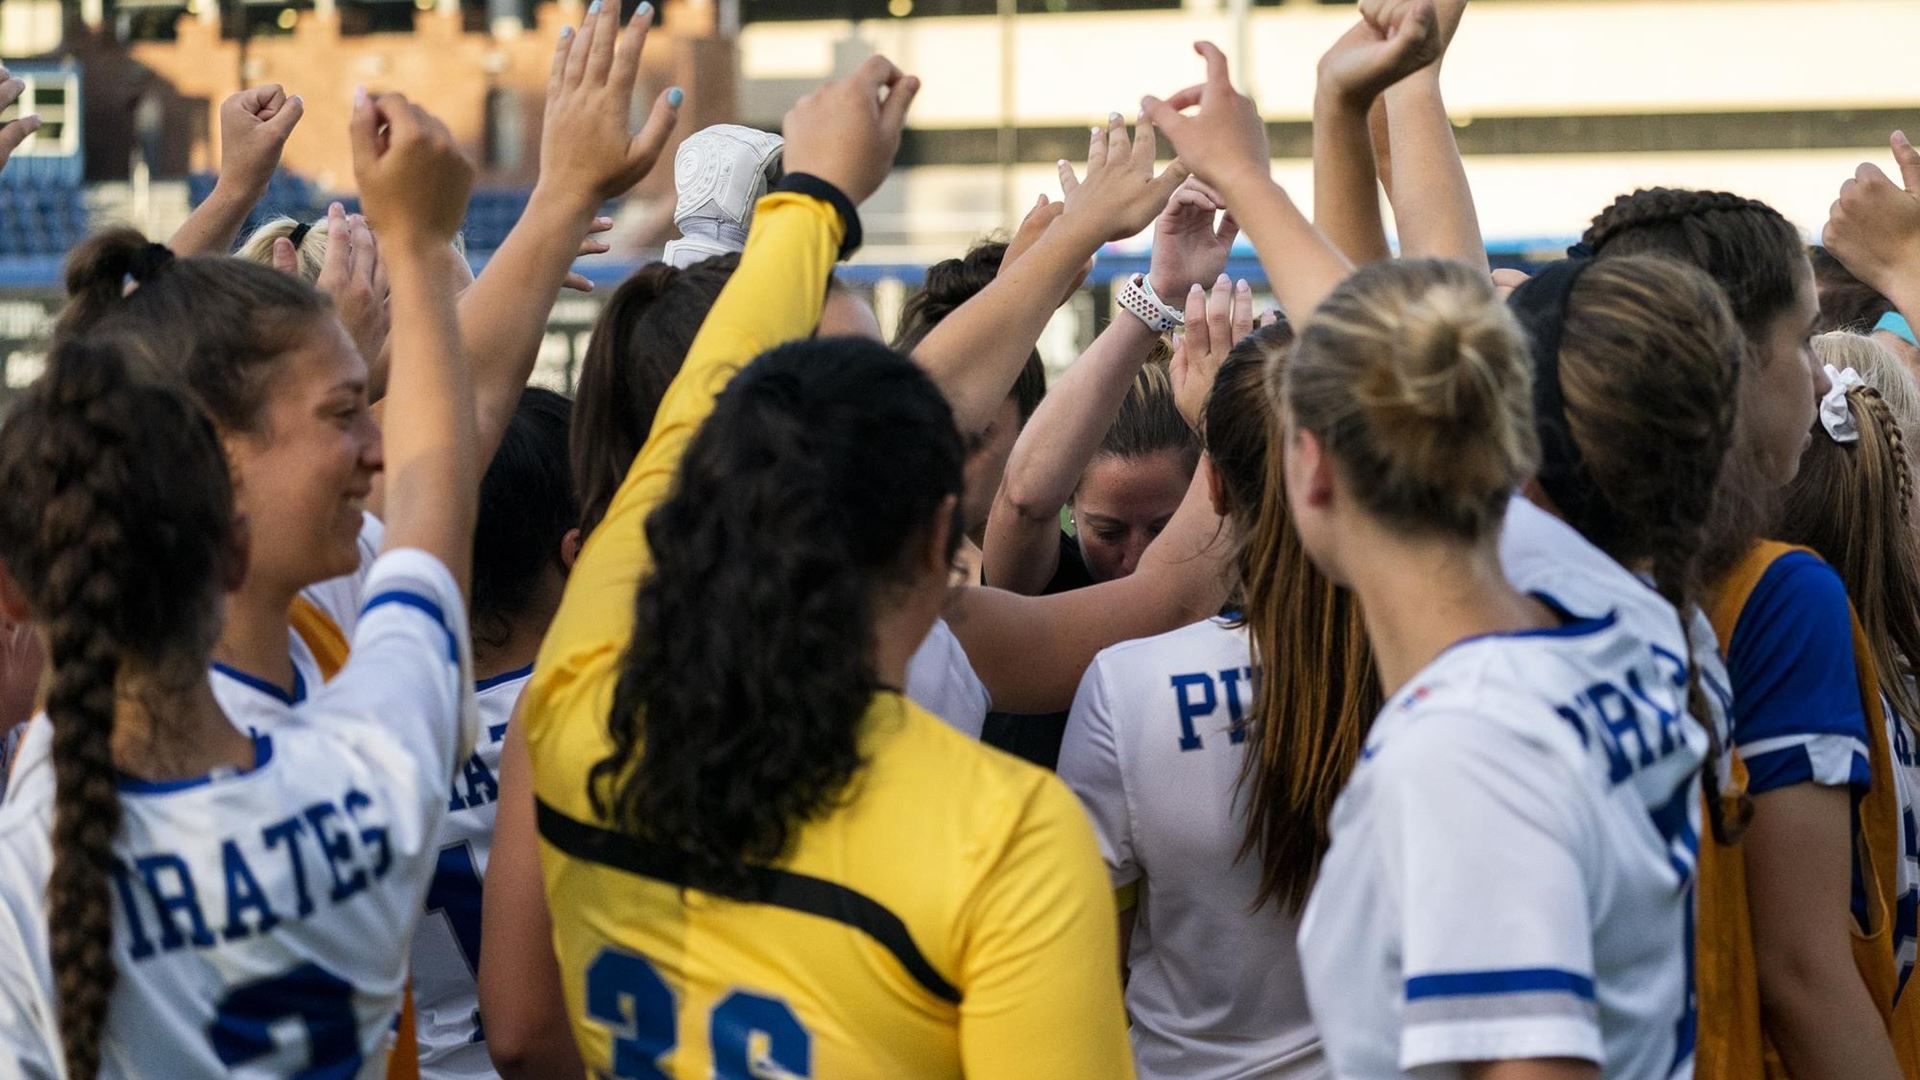 The Seton Hall women's soccer team huddles during a game on the road.